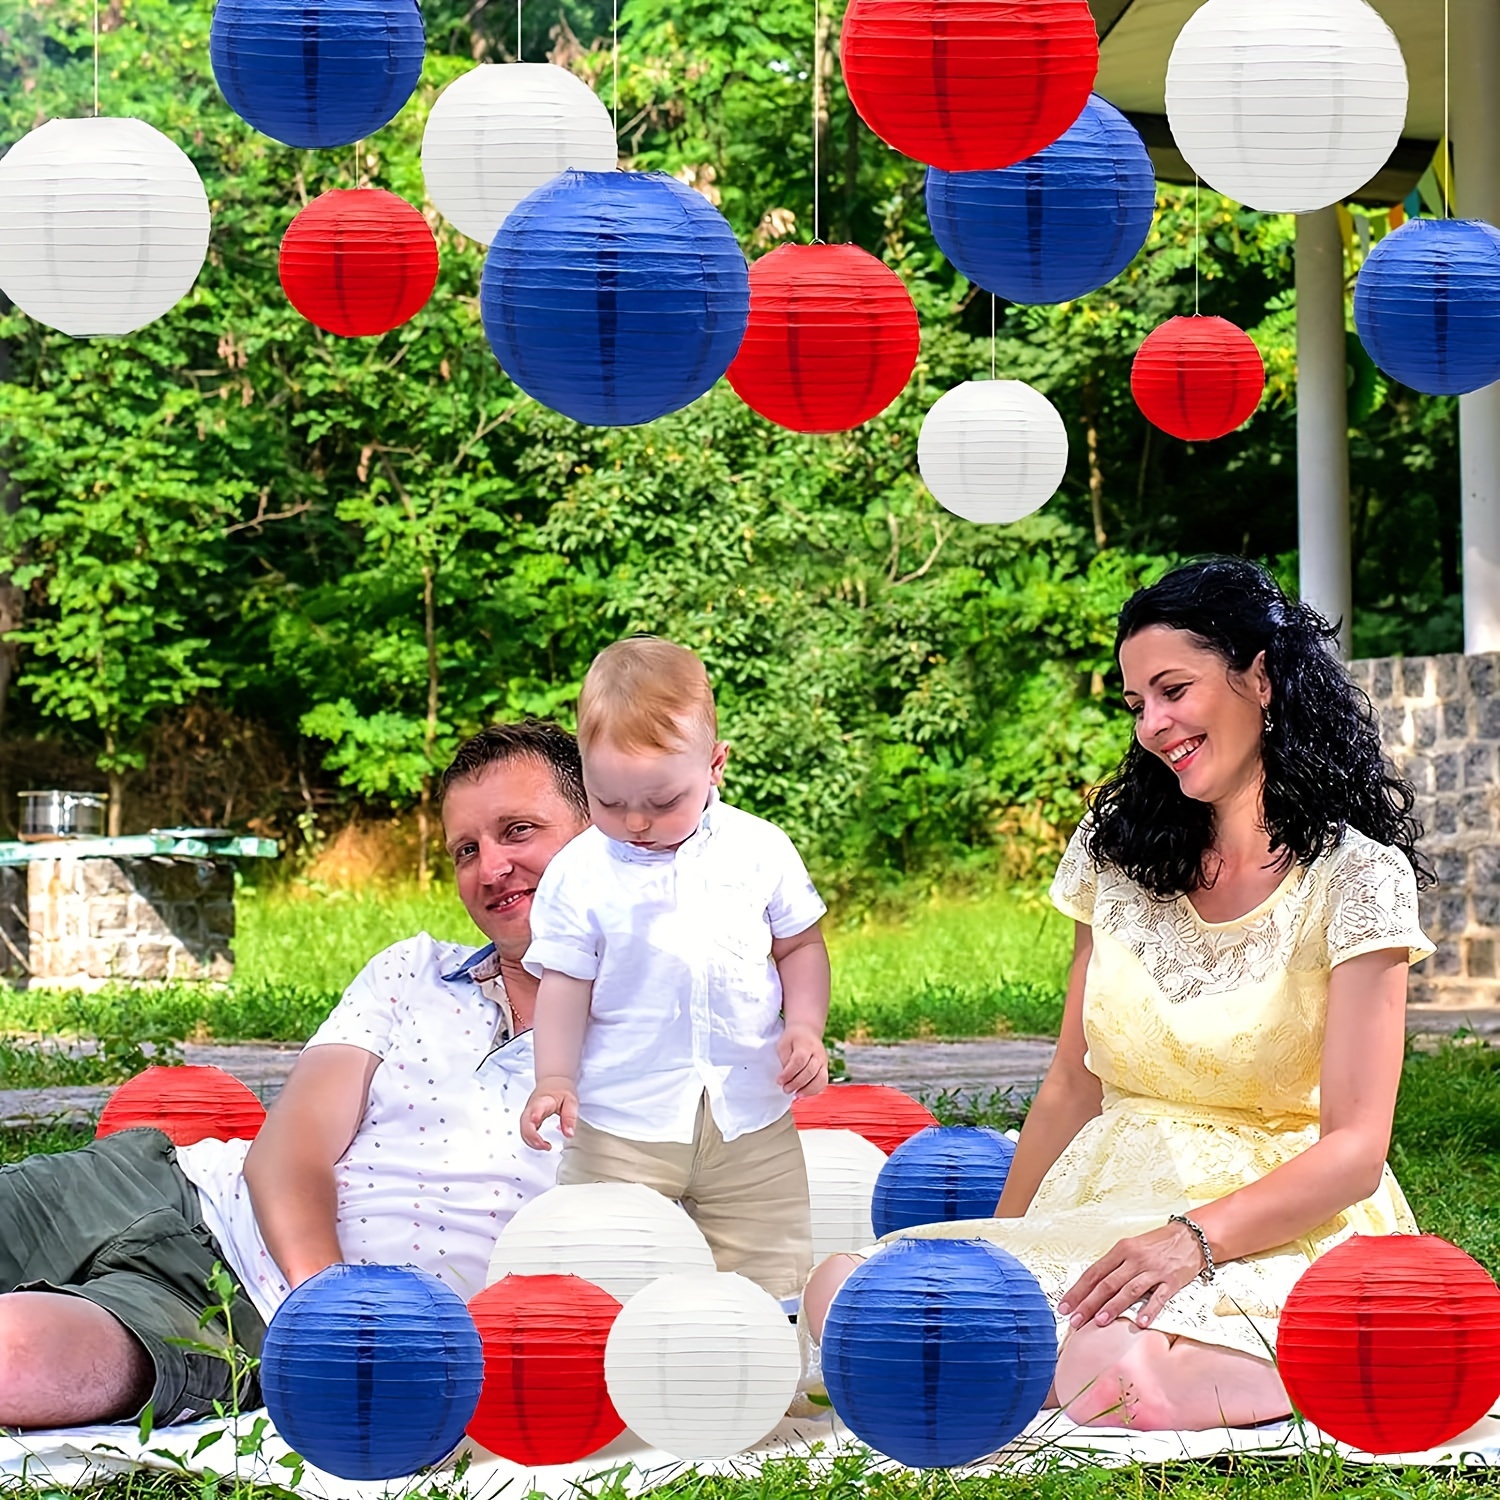 10pcs 9 Lanterns + 1889.76 Inch Fishing Line, Outdoor Lantern Decoration,  Red White Blue White Paper Lantern For Independence Day Party Decoration